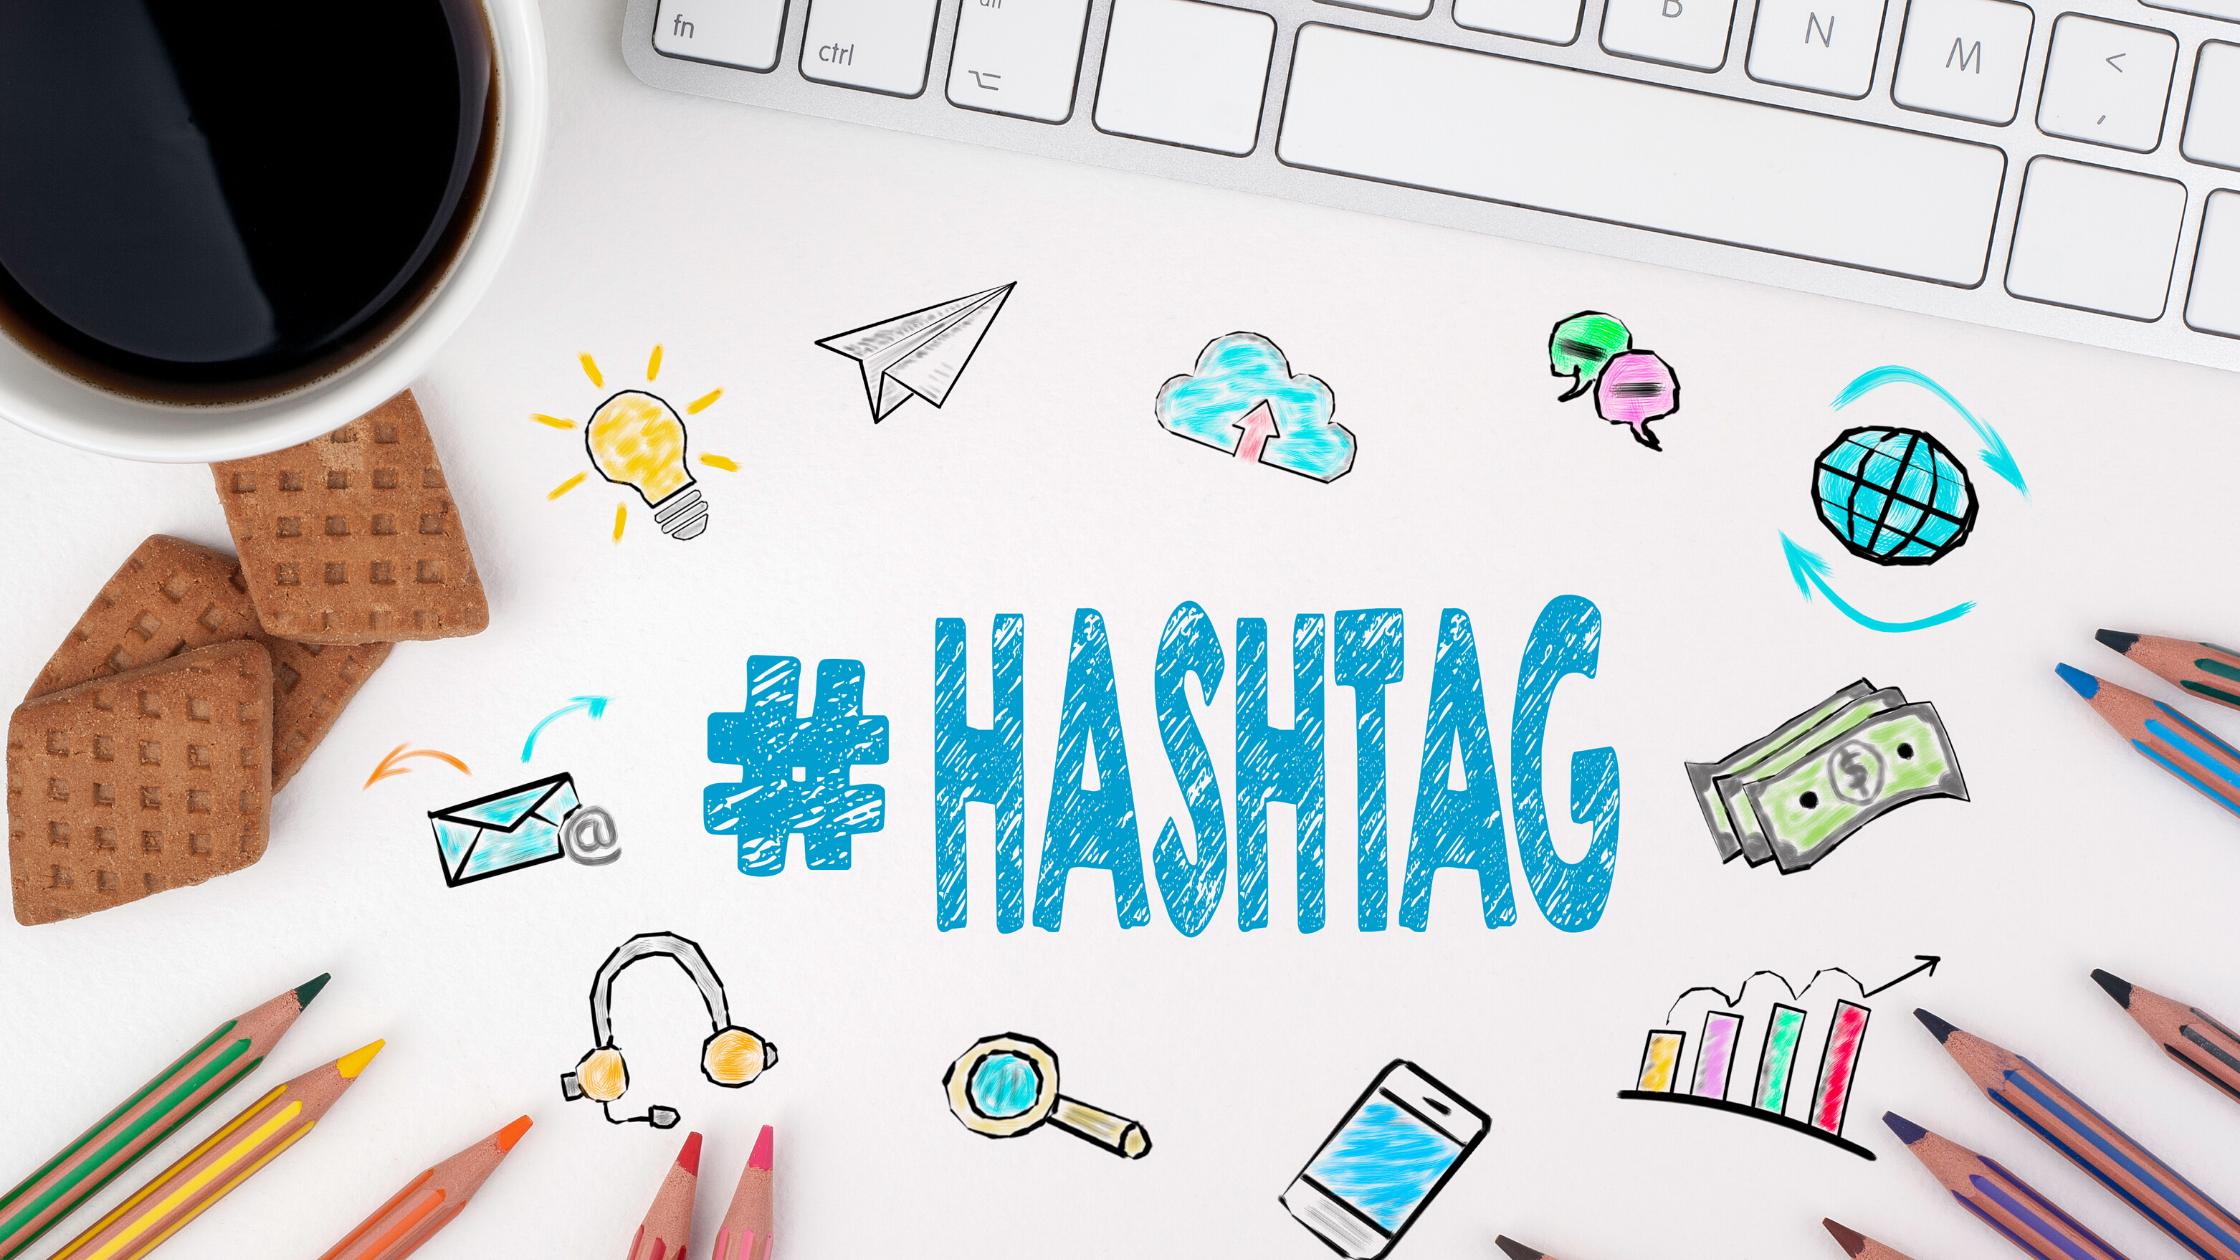 Hashtags and Why They Are So Important in Building Your Business